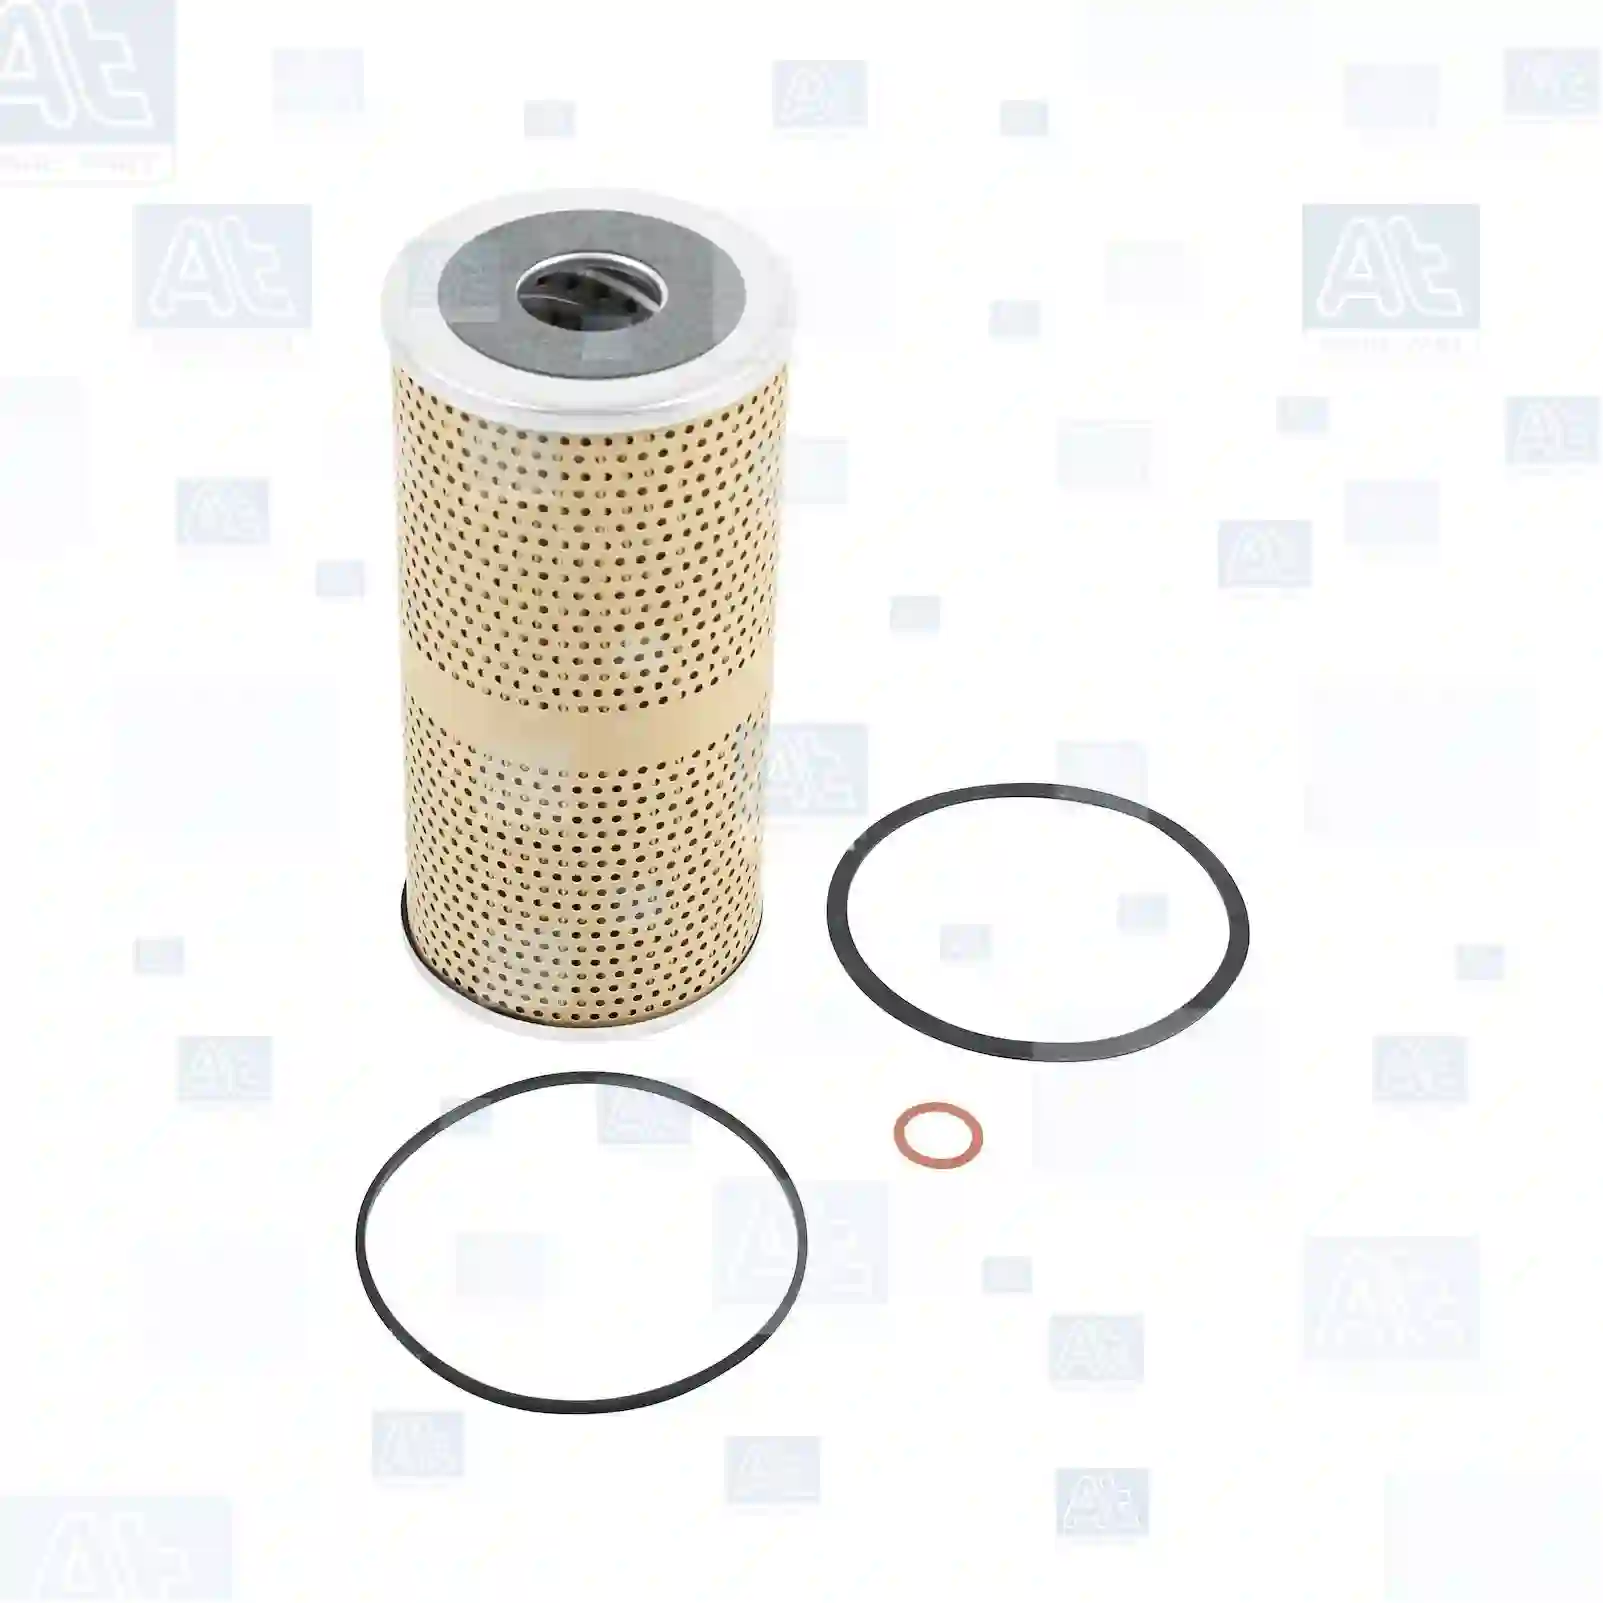 Oil Filter Oil filter, at no: 77700064 ,  oem no:00597926, 00793528, 00817332, 00908285, 01856915, 01880566, 04310216, 043710219, 059792, 079352, 079362, 081733, 090828, 185691, 1856915, 188056, 197121, 221041, 3022104, 30221041, 3104894, 31048945, 431021, 4335348, 43353488, 4369988, 43699880, 4371021, 43710219, 4395889, 665859, 6658595, 70197121, 73022104, 73104894, 74335348, 74371021, 74395889, 5573014, 5573014, 131470H1, 131570H1, 302565R91, 302574R91, 303122R91, 304753C91, 3068931R91, 3071235R91, 319826R91, 319926R91, 333719R91, 340175R91, 35034, 35054, 612724C91, 613797C91, 613798C91, 877380C91, L031230, L31230, L31231, L33711, R14458, 3I-1149, 3I-1224, 9Y-4456, 9Y-4515, 2647666, 128903, 131570, 142879, 142897, 215502, 3301060, 3301061, 988618, 98861800, 5573014, 4194770, 4788715, 7390983, 7391047, 00022104, 00079325, 00079352, 00081733, 00090828, 00185691, 00188056, 00197121, 00431021, 00665859, 00761970, 01366330, 01831101, 01836103, 01856915, 01880566, 01901934, 03022104, 04335348, 04369988, 04371021, 04371137, 04395889, 04528873, 04538573, 04587711, 04590074, 04596890, 04596891, 04636295, 04636401, 04777257, 04777258, 04887711, 07722336, 08813556, 45938901, 552442365, 556019309, 701856915, 701880566, 70022104, 70059792, 70079325, 70079352, 70081733, 70090828, 70197121, 70431021, 73022104, 73104894, 74335348, 74347021, 74371021, 74371137, 74395889, 74538573, 74587711, 74590074, 74596890, 74596891, 74636401, 74887711, 78813556, 79010563, 79032093, Y02274510, YO2274510, 5000872, 5011472, DNP550132, 5572600, 5573012, 5573013, 5573014, 5573102, 5574971, 5575134, 5575176, 5575208, 5575995, 5576067, 5576200, 5577106, 5577124, 5578014, 6427275, 6436145, 6437275, 6438590, 9020329, 9029329, 9307817, 5572600, 5573012, 5573013, 5573014, 5573102, 5574971, 5575134, 5575176, 5575208, 5575995, 5576067, 5576200, 5577106, 5577124, 5578014, 6427275, 6436145, 6437275, 6438590, 6439400, 7984308, 7437000038, 9437100063, 9437100139, 01901608, 01901934, 04596890, 04636401, 08813556, 1901934, 73104894, 74590074, 78813556, 32/300518, AR29554R, AR30643R, AR36043R, AT34760, E035481, E35481, 4371021, 5573014, 5574486, KW509, KW509LUB, 5000931, P21366, 20010, 236GB240, 236GB240LUB, 1087415, 1087415M91, 1755206, 835514, 969062, PB509N, PB509NLUB, 1050545, 150545, W1050545, 0003139010, 0003180836, 0003620612, HD4124, LU698, 3F12181, 5573014, 5576711, 5677124, 267518, 3130910, 40141558, 4095654, 62129697, 66175068, 6617509, 6631812, 79211272, 892972 At Spare Part | Engine, Accelerator Pedal, Camshaft, Connecting Rod, Crankcase, Crankshaft, Cylinder Head, Engine Suspension Mountings, Exhaust Manifold, Exhaust Gas Recirculation, Filter Kits, Flywheel Housing, General Overhaul Kits, Engine, Intake Manifold, Oil Cleaner, Oil Cooler, Oil Filter, Oil Pump, Oil Sump, Piston & Liner, Sensor & Switch, Timing Case, Turbocharger, Cooling System, Belt Tensioner, Coolant Filter, Coolant Pipe, Corrosion Prevention Agent, Drive, Expansion Tank, Fan, Intercooler, Monitors & Gauges, Radiator, Thermostat, V-Belt / Timing belt, Water Pump, Fuel System, Electronical Injector Unit, Feed Pump, Fuel Filter, cpl., Fuel Gauge Sender,  Fuel Line, Fuel Pump, Fuel Tank, Injection Line Kit, Injection Pump, Exhaust System, Clutch & Pedal, Gearbox, Propeller Shaft, Axles, Brake System, Hubs & Wheels, Suspension, Leaf Spring, Universal Parts / Accessories, Steering, Electrical System, Cabin